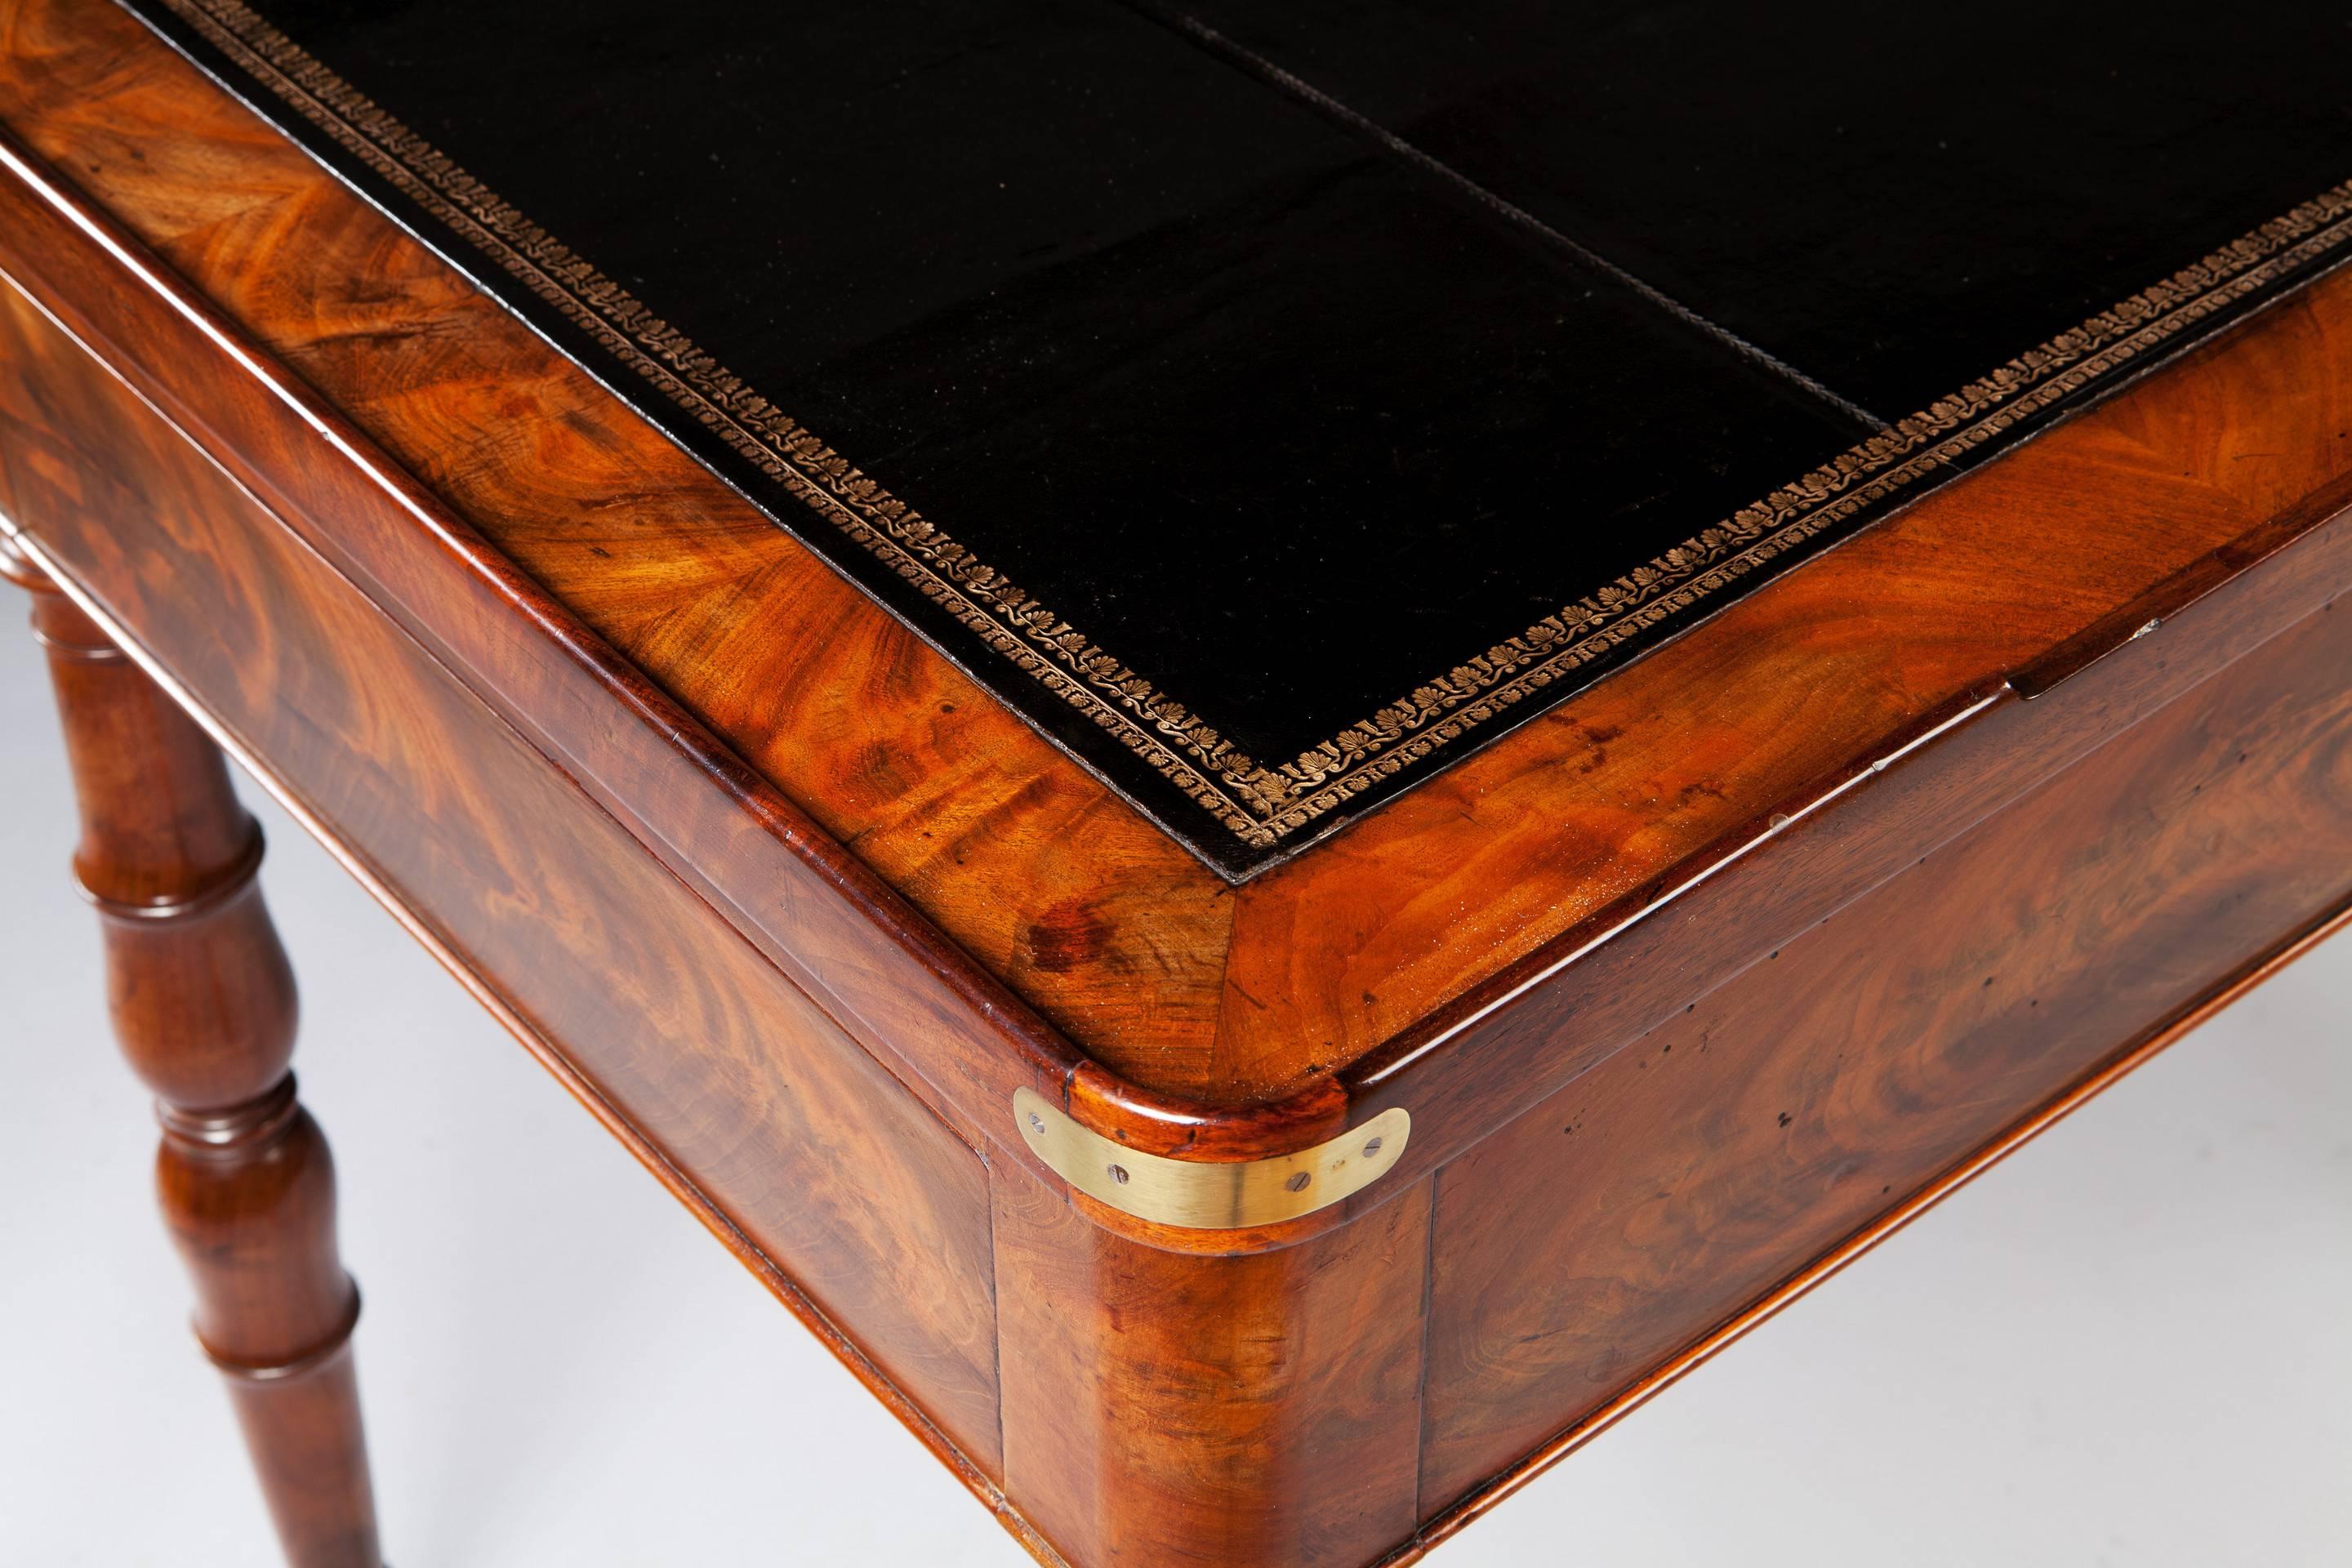 Directoire Period Mahogany Tric Trac Backgammon Games Table In Excellent Condition In London, by appointment only